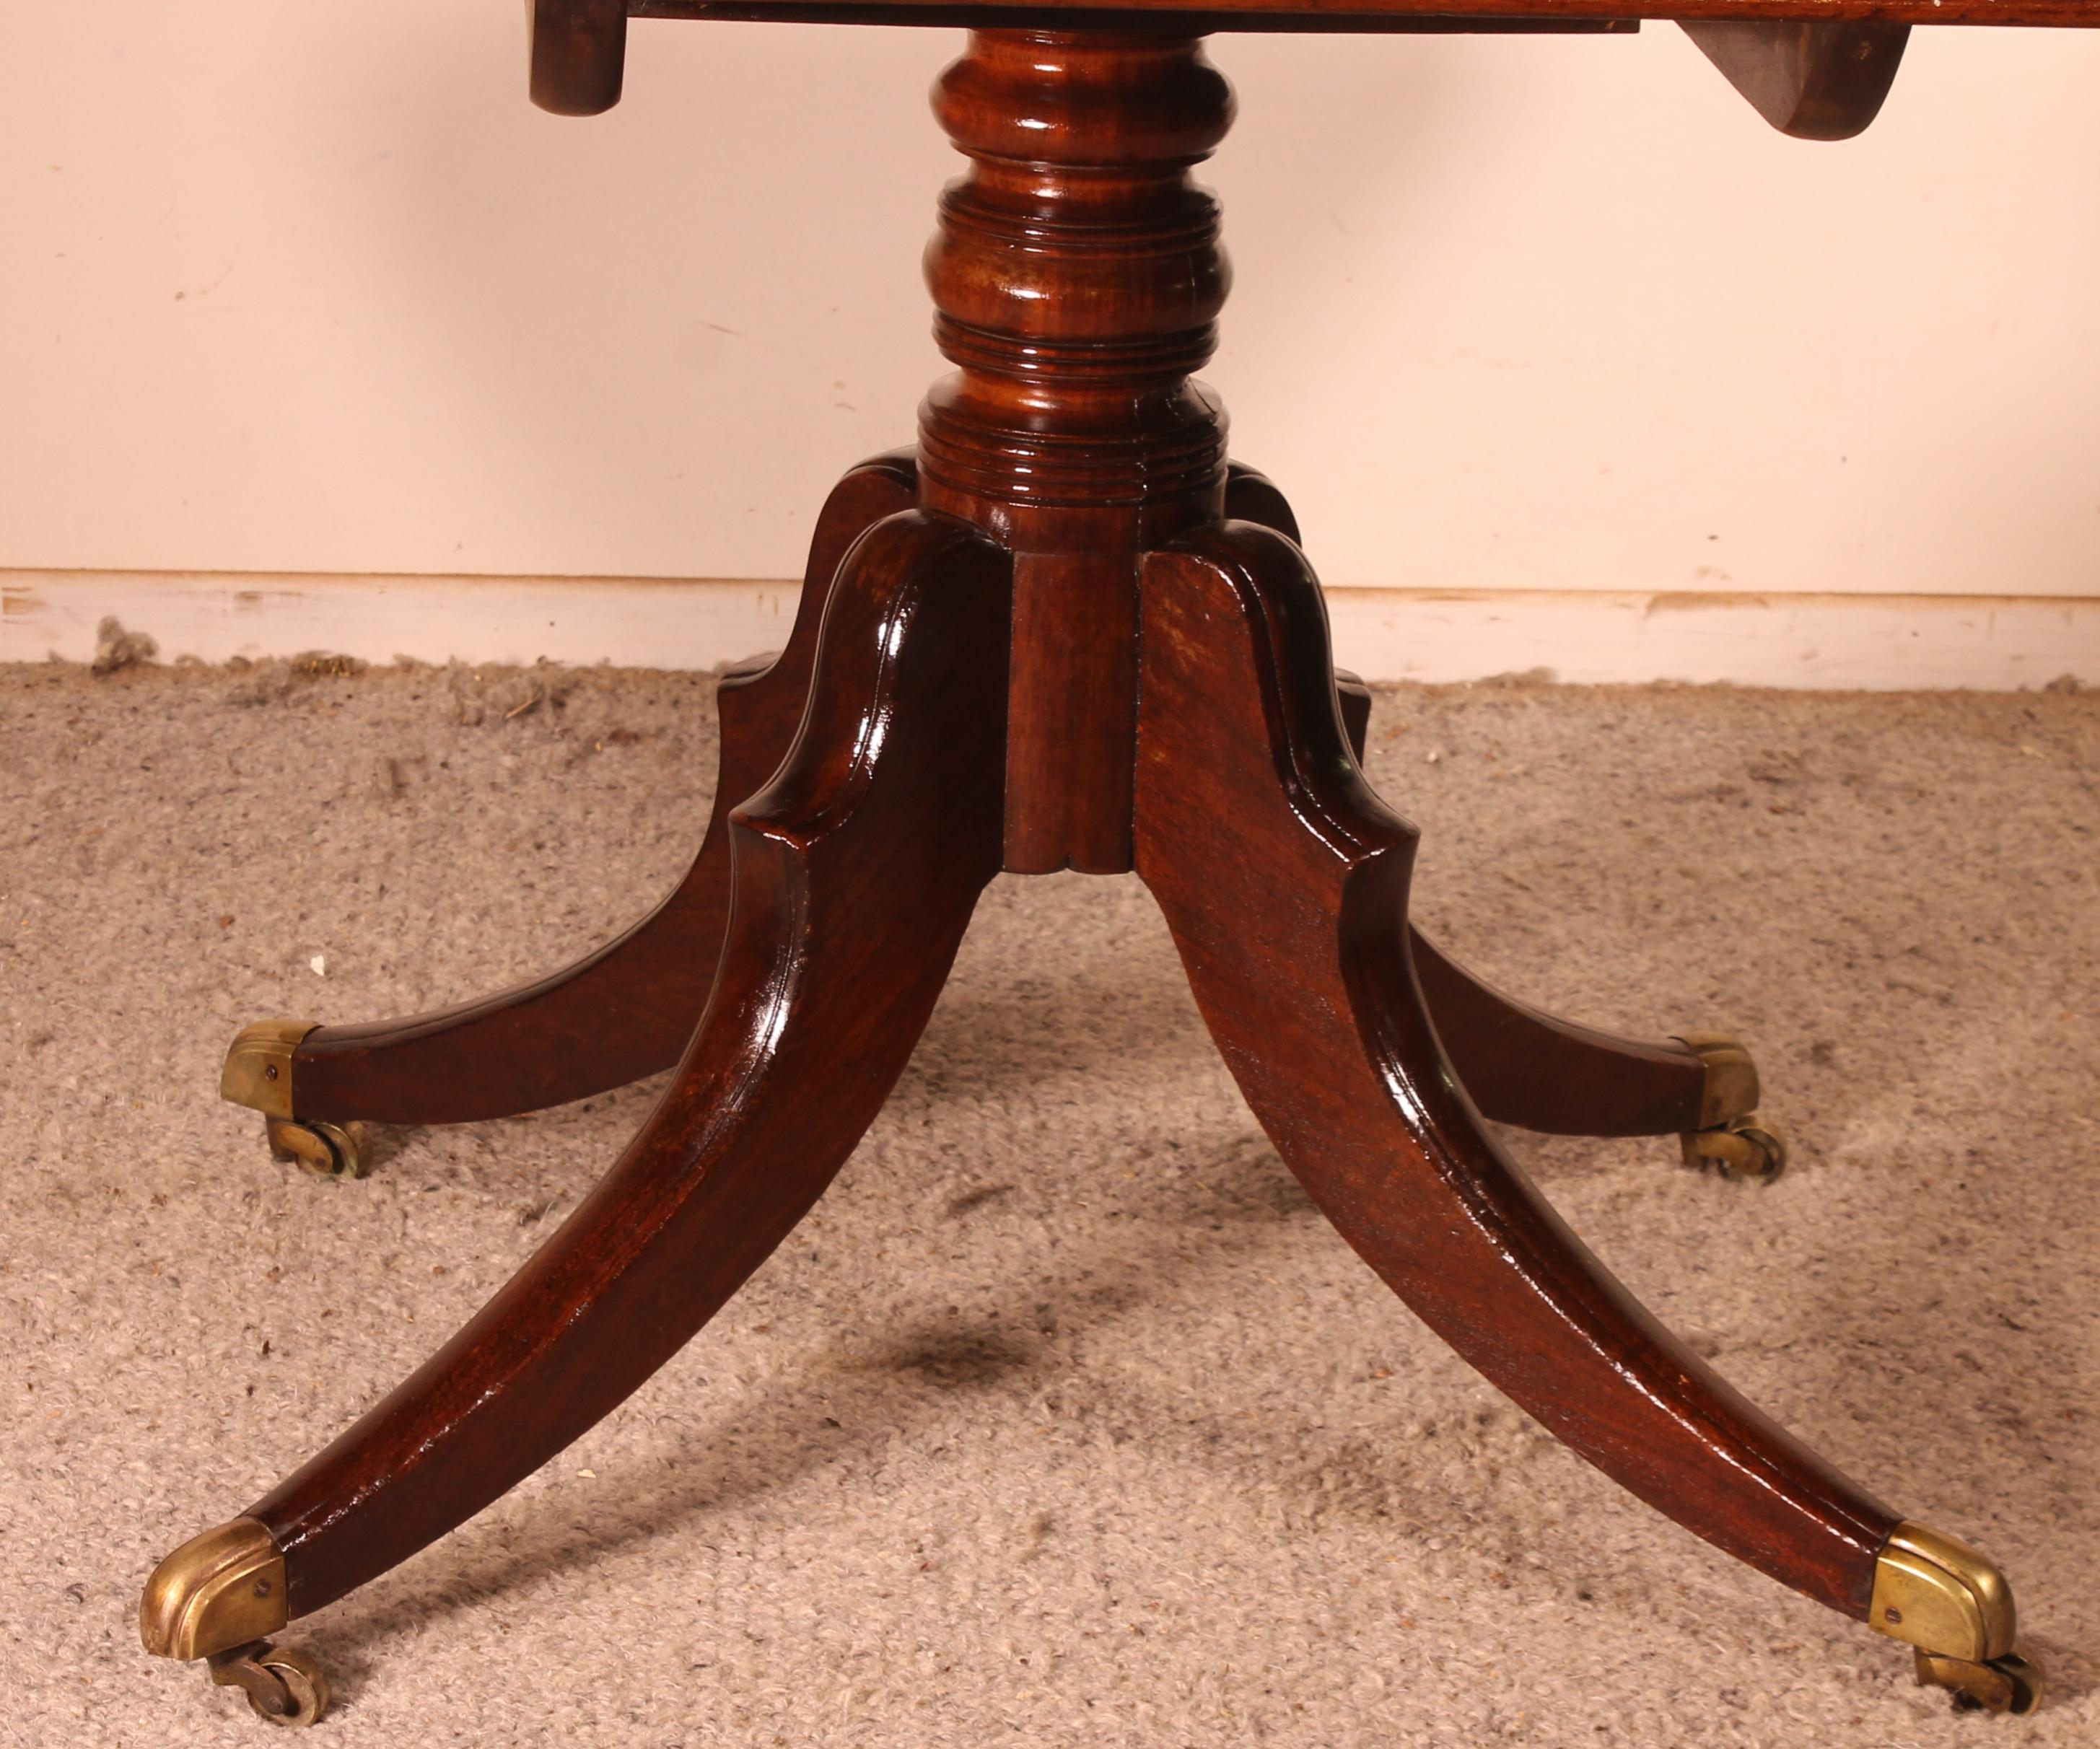 A fine regency period table from the beginning of the 19th century circa 1800 in solid mahogany, -England
Very beautiful solid mahogany table top with a beautiful flame which rests on a very beautiful quadripod base in solid mahogany also which